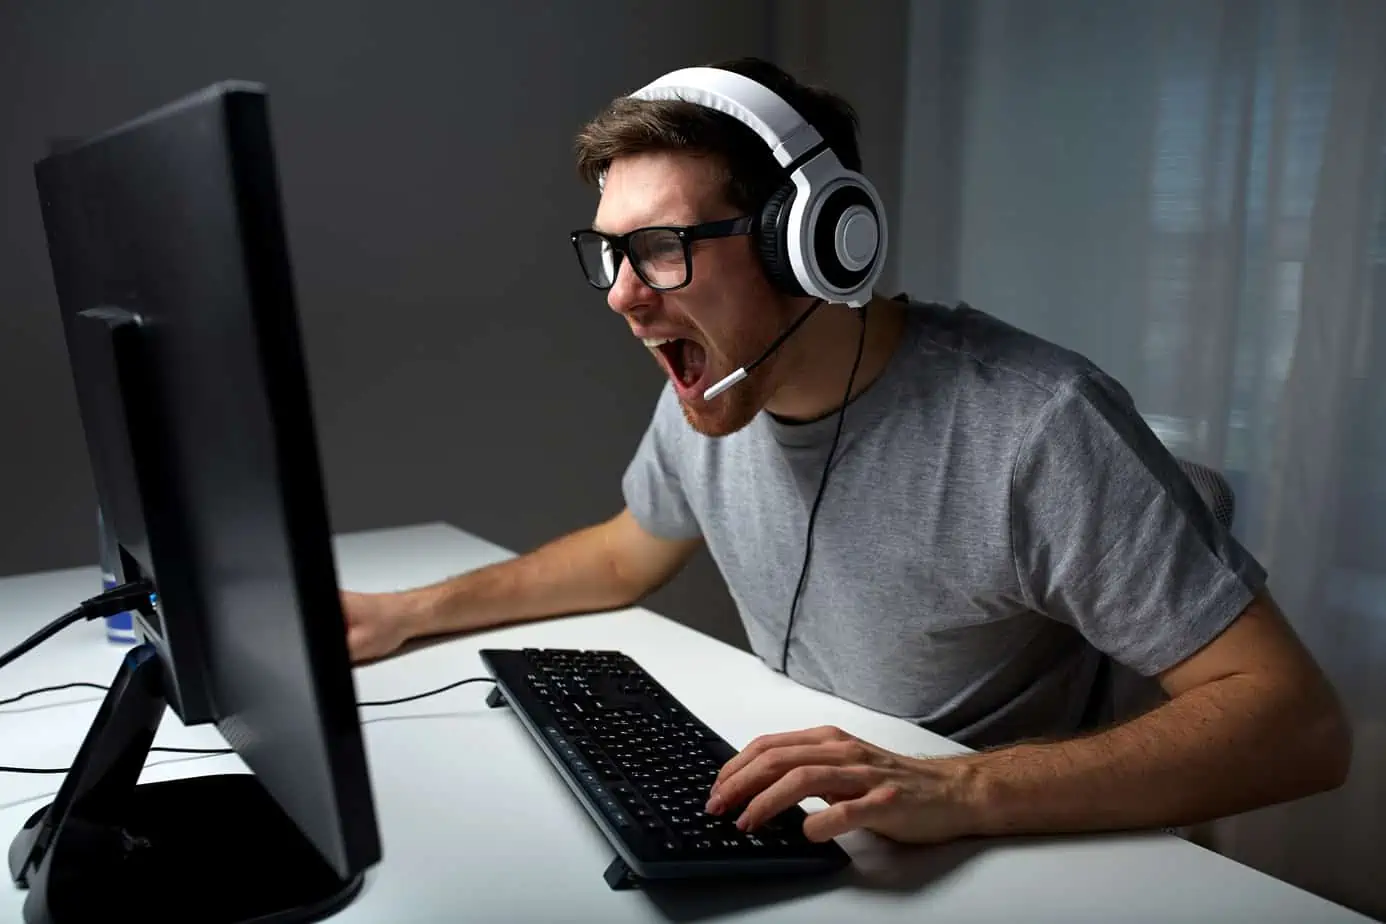 A man wearing headphones and using a computer